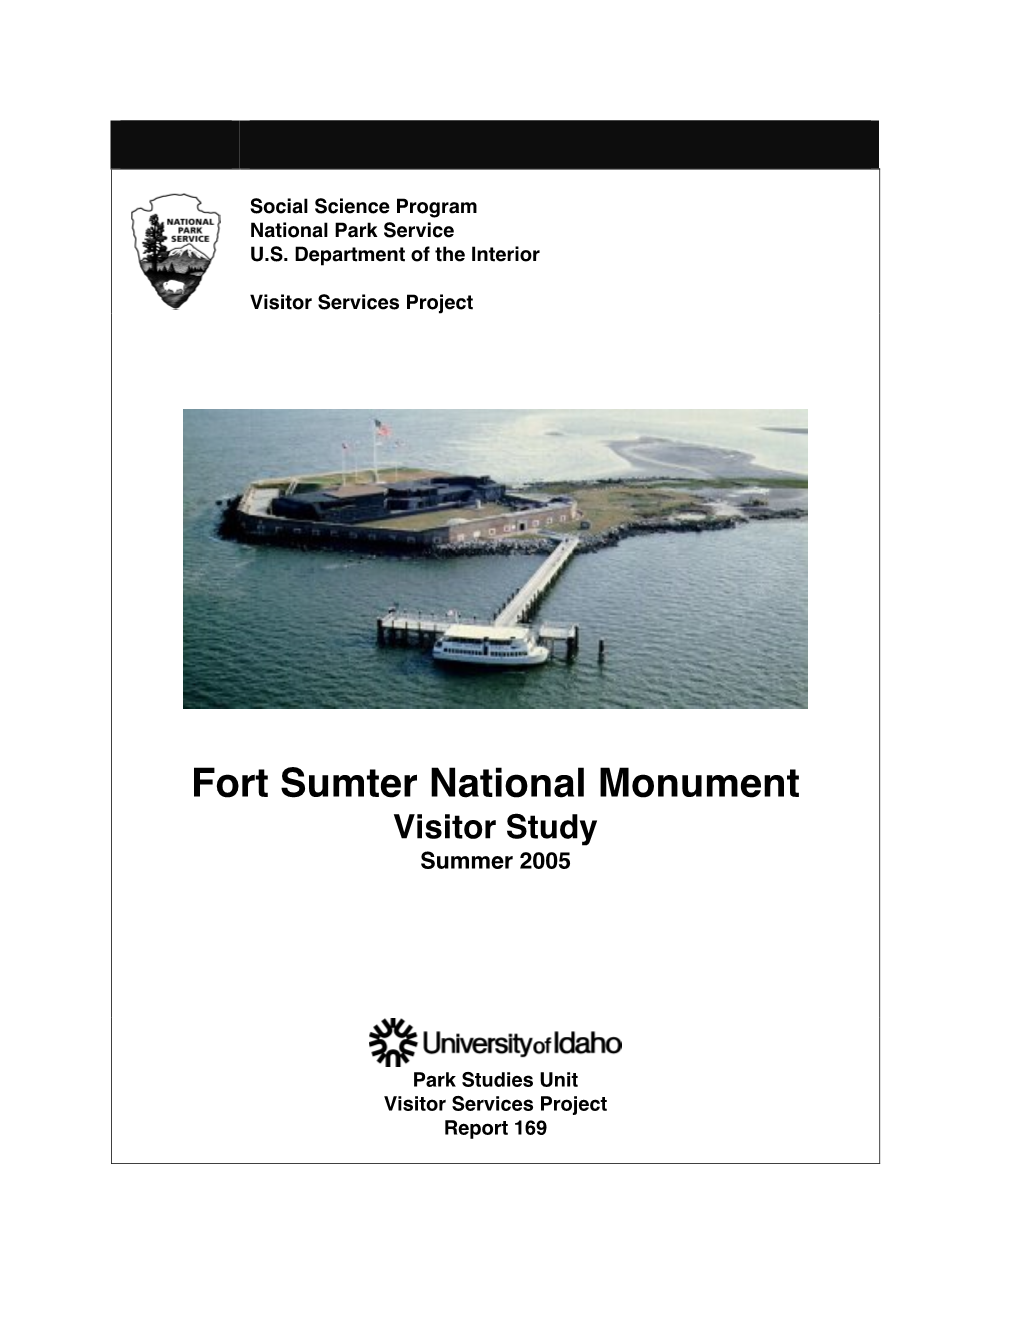 Fort Sumter National Monument Visitor Study Summer 2005